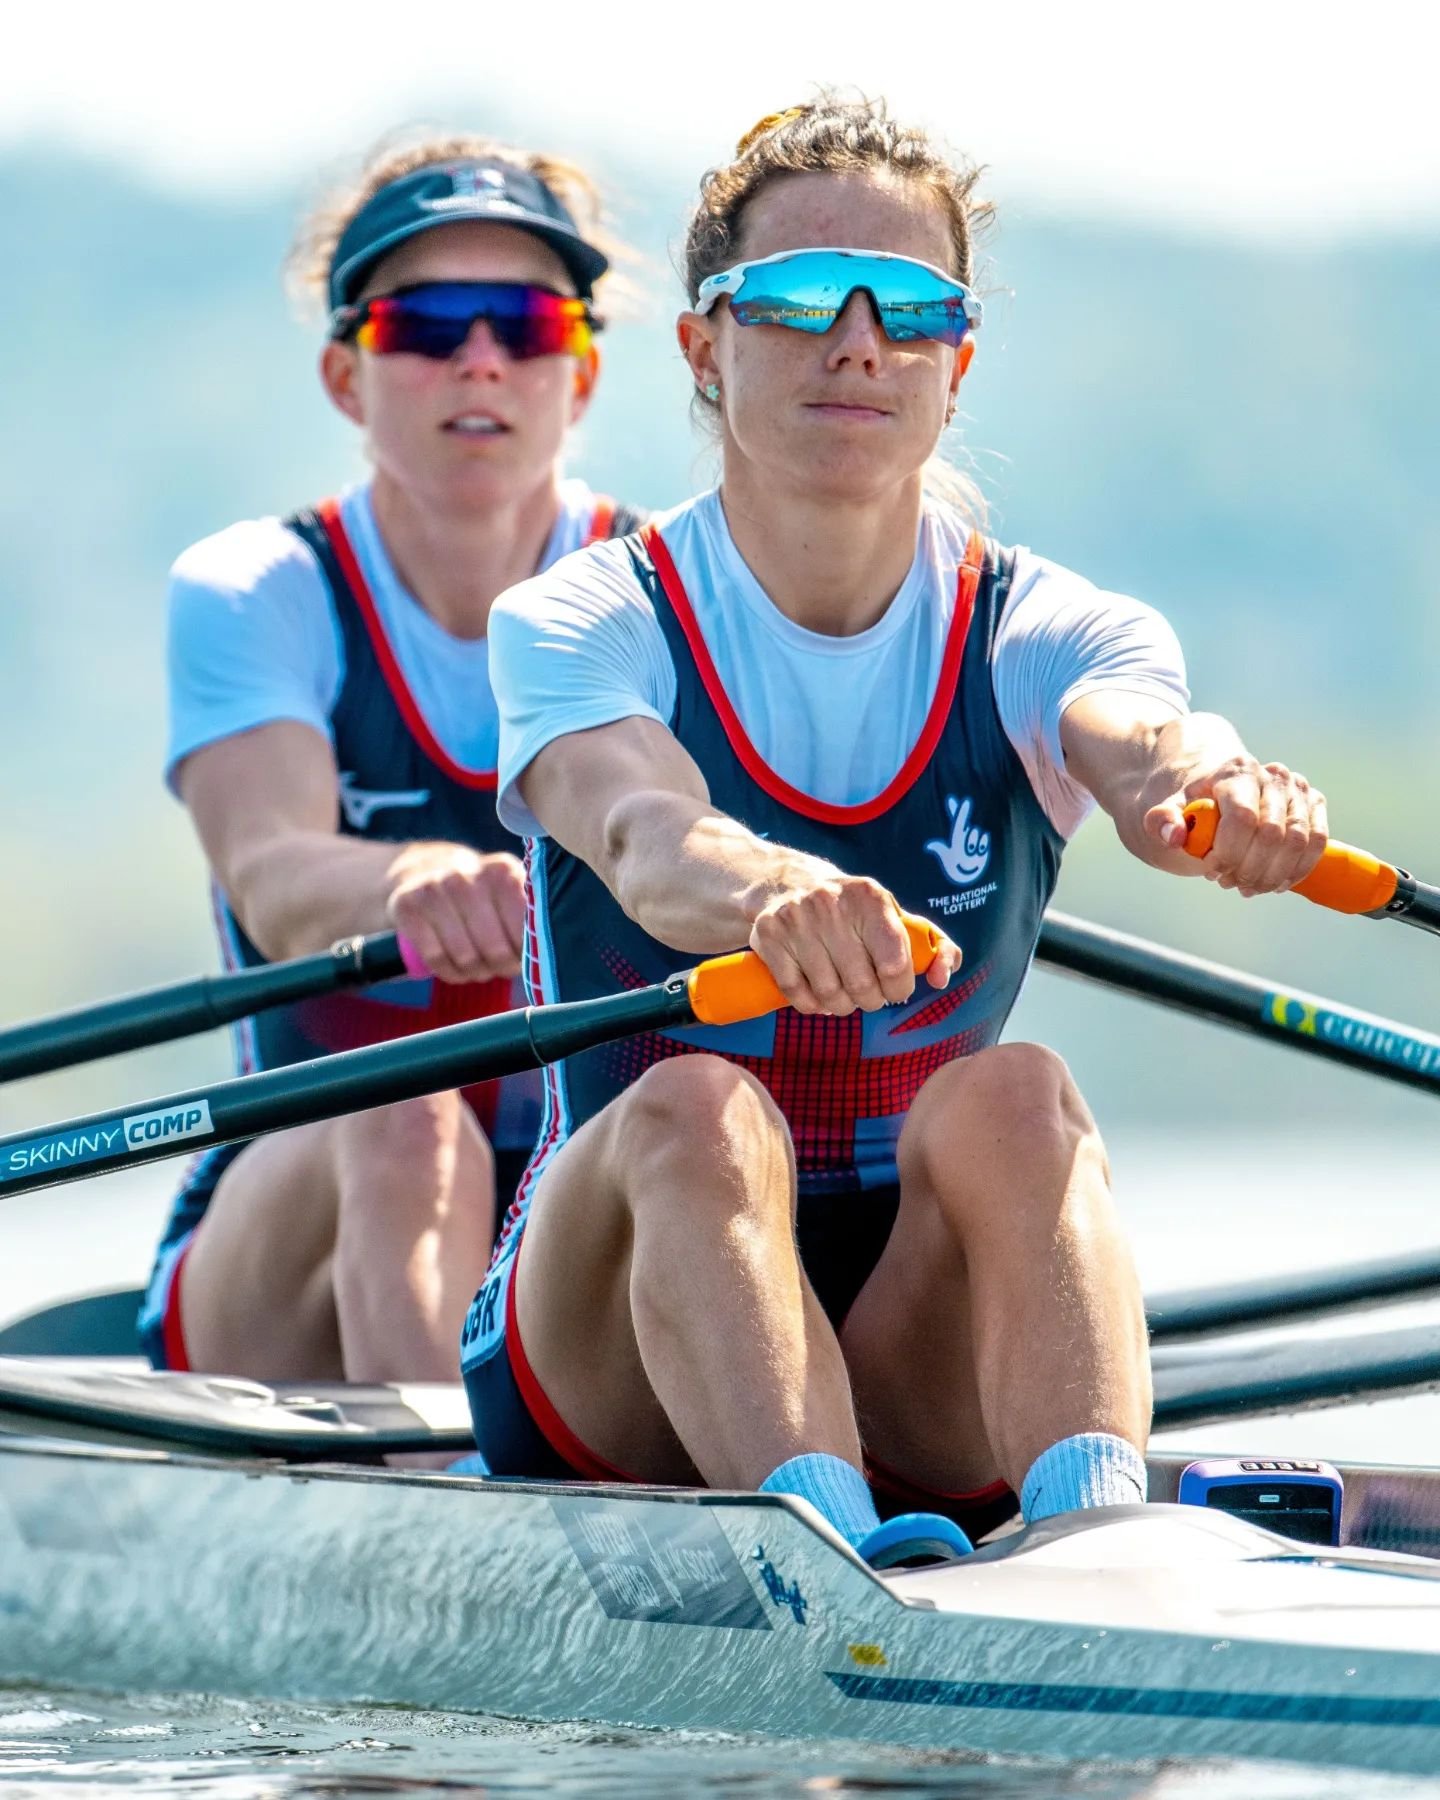 Top Olympic rowers Imogen Grant and Emily Craig are big Marigold fans and we are proud to  have been supporting them with some of our products in the build up to Paris 2024
🏅
Their faves are the vegan meat alternatives and our new healthysnack Popco